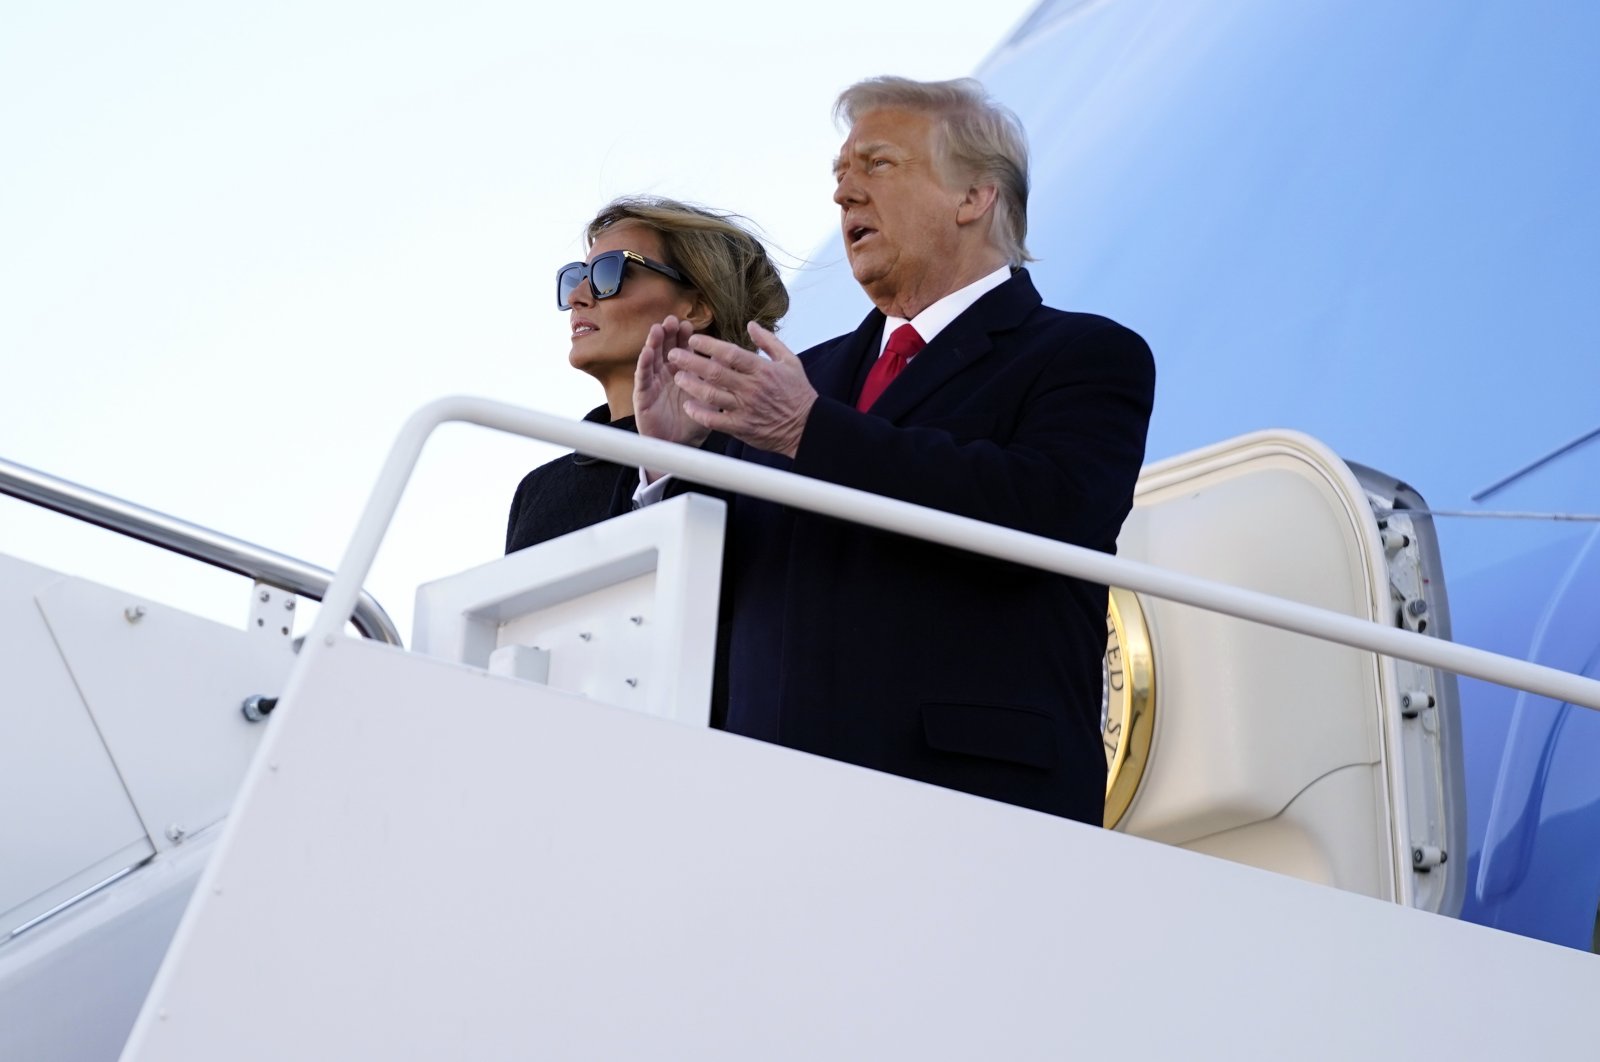 President Donald Trump and first lady Melania Trump board Air Force One at Andrews Air Force Base, Md., Jan. 20, 2021.(AP Photo)